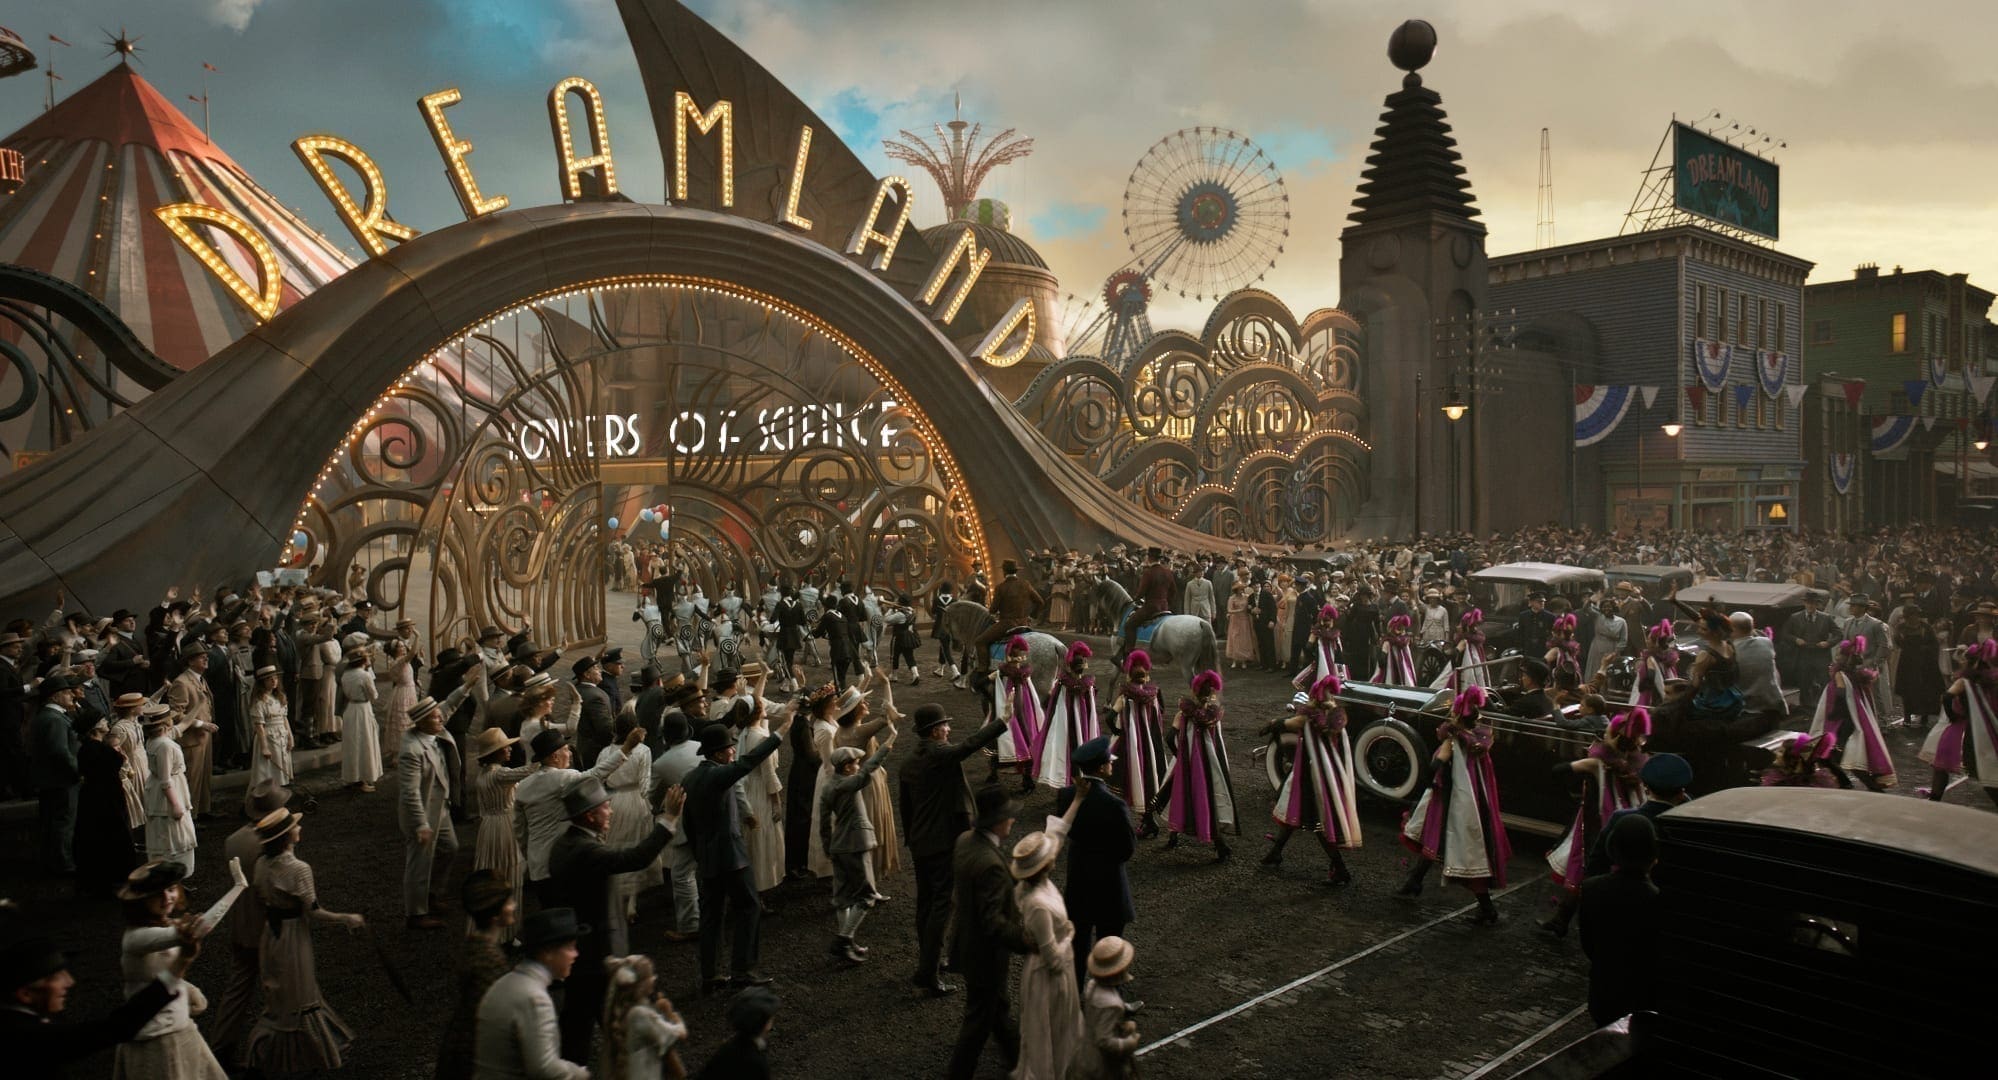 DREAMING BIG -- In Tim Burton’s all-new, live-action reimagining of “Dumbo,” persuasive entrepreneur V.A. Vandevere (Michael Keaton) decides that a young elephant from a struggling circus belongs in his newest, larger-than-life entertainment venture, Dreamland. Directed by Burton and produced by Katterli Frauenfelder, Derek Frey, Ehren Kruger and Justin Springer, “Dumbo” flies into theaters on March 29, 2019. © 2018 Disney Enterprises, Inc. All Rights Reserved.